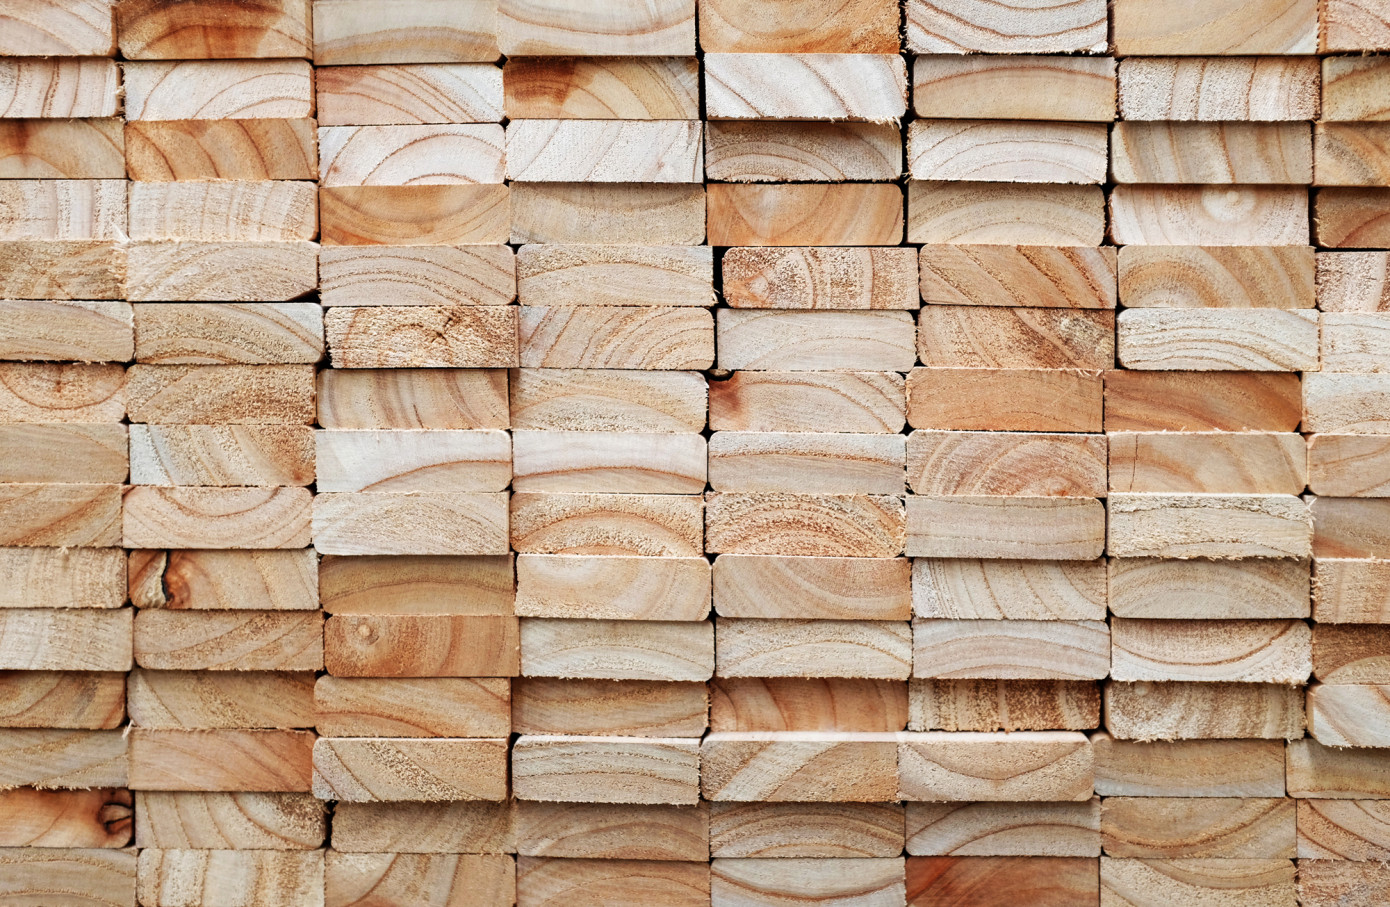 In October, price for softwood lumber imported to Japan decreases 8%